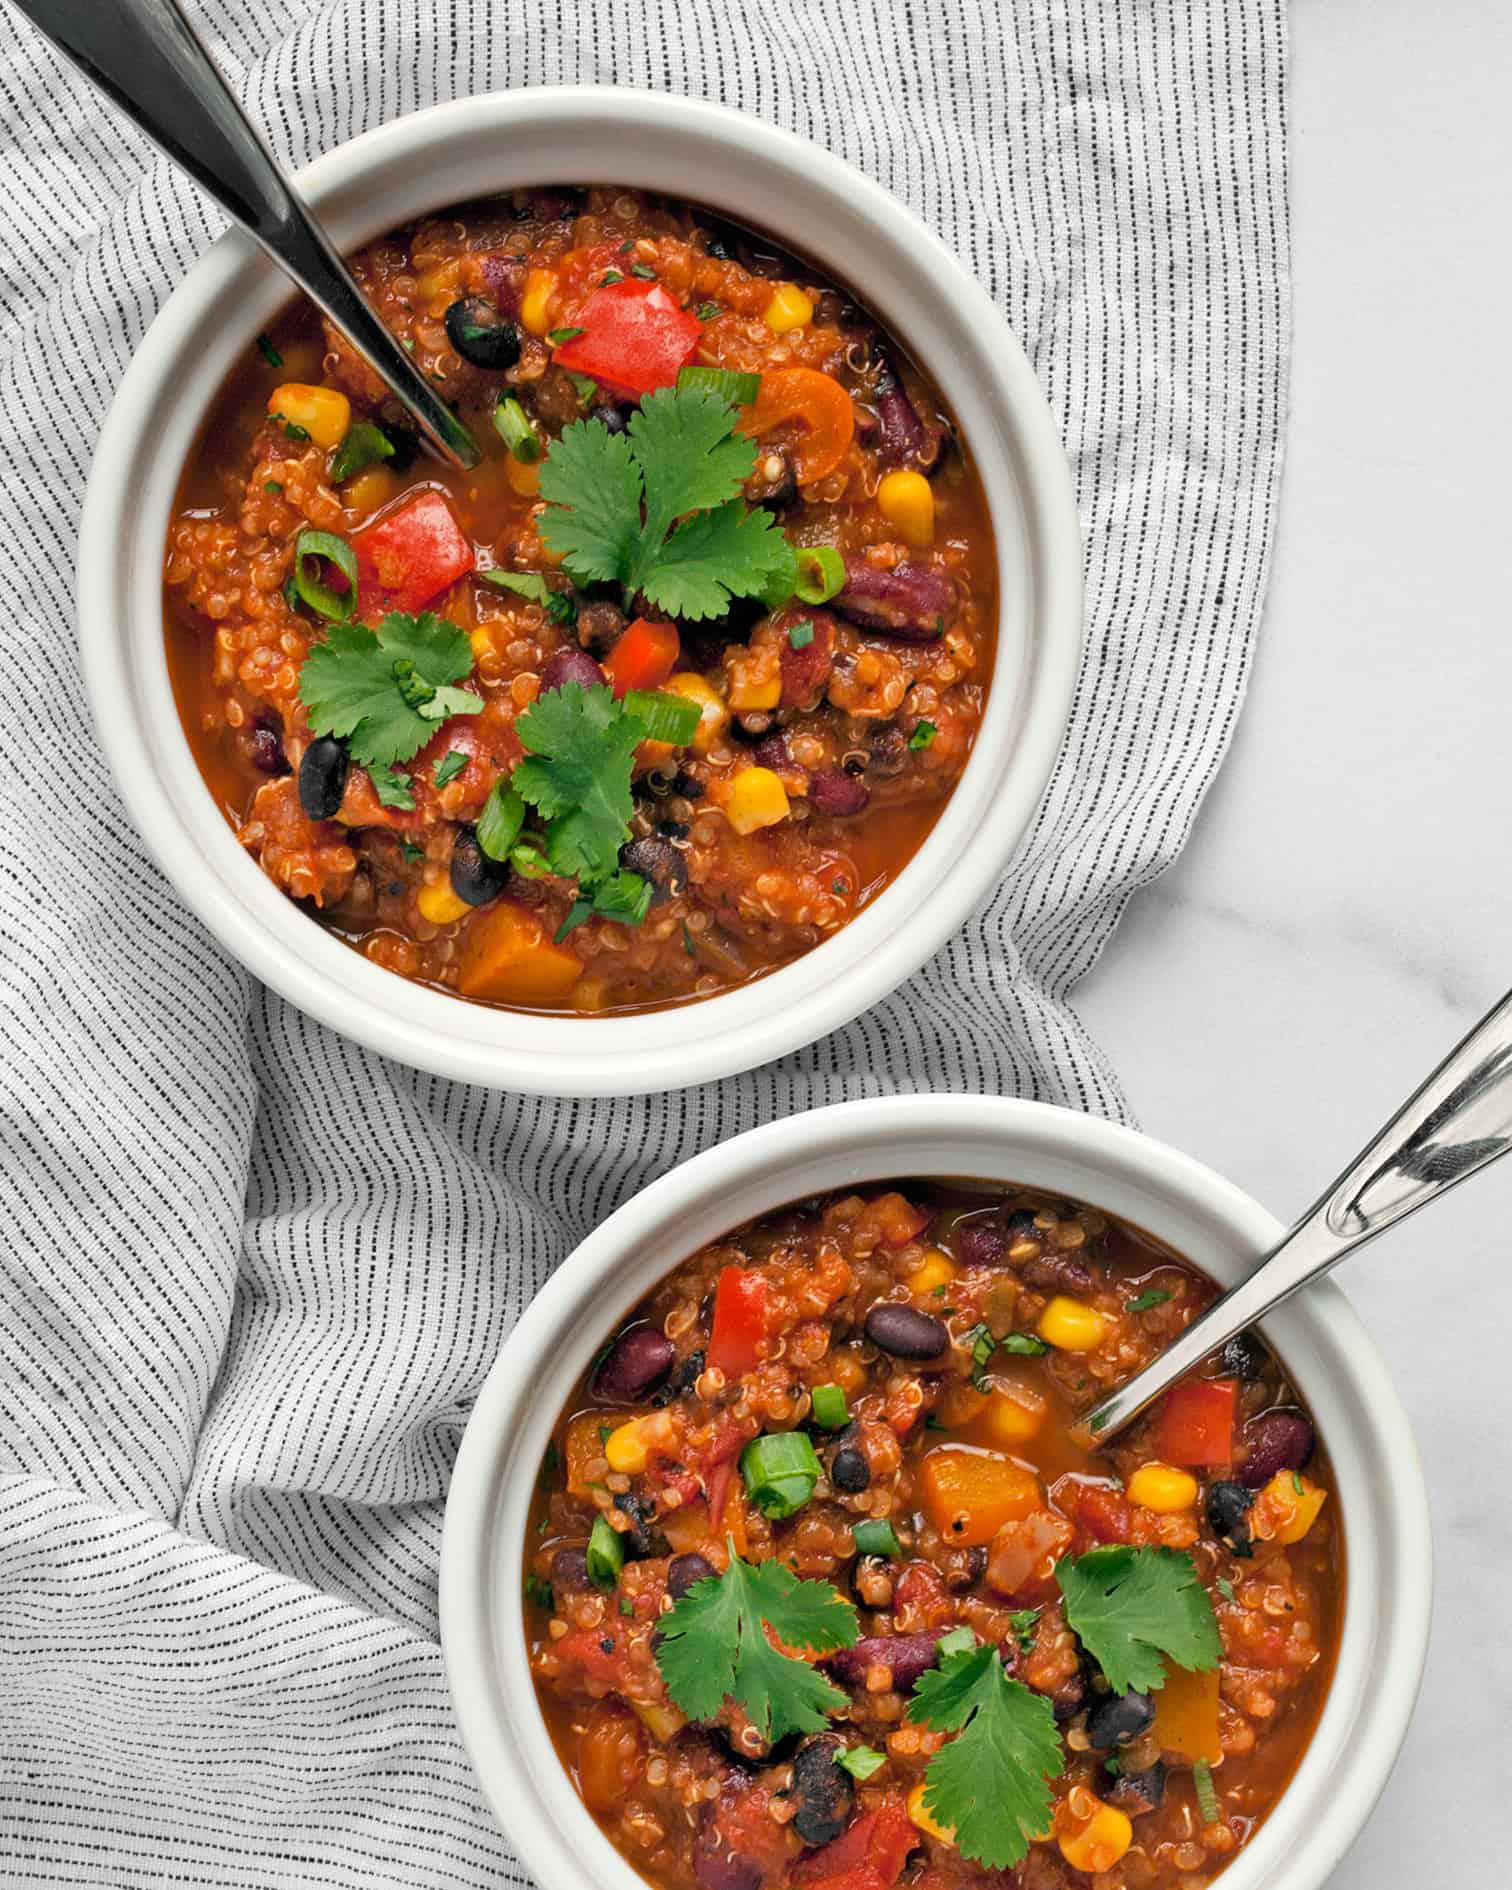 Two bowls of chili topped with cilantro and scallions